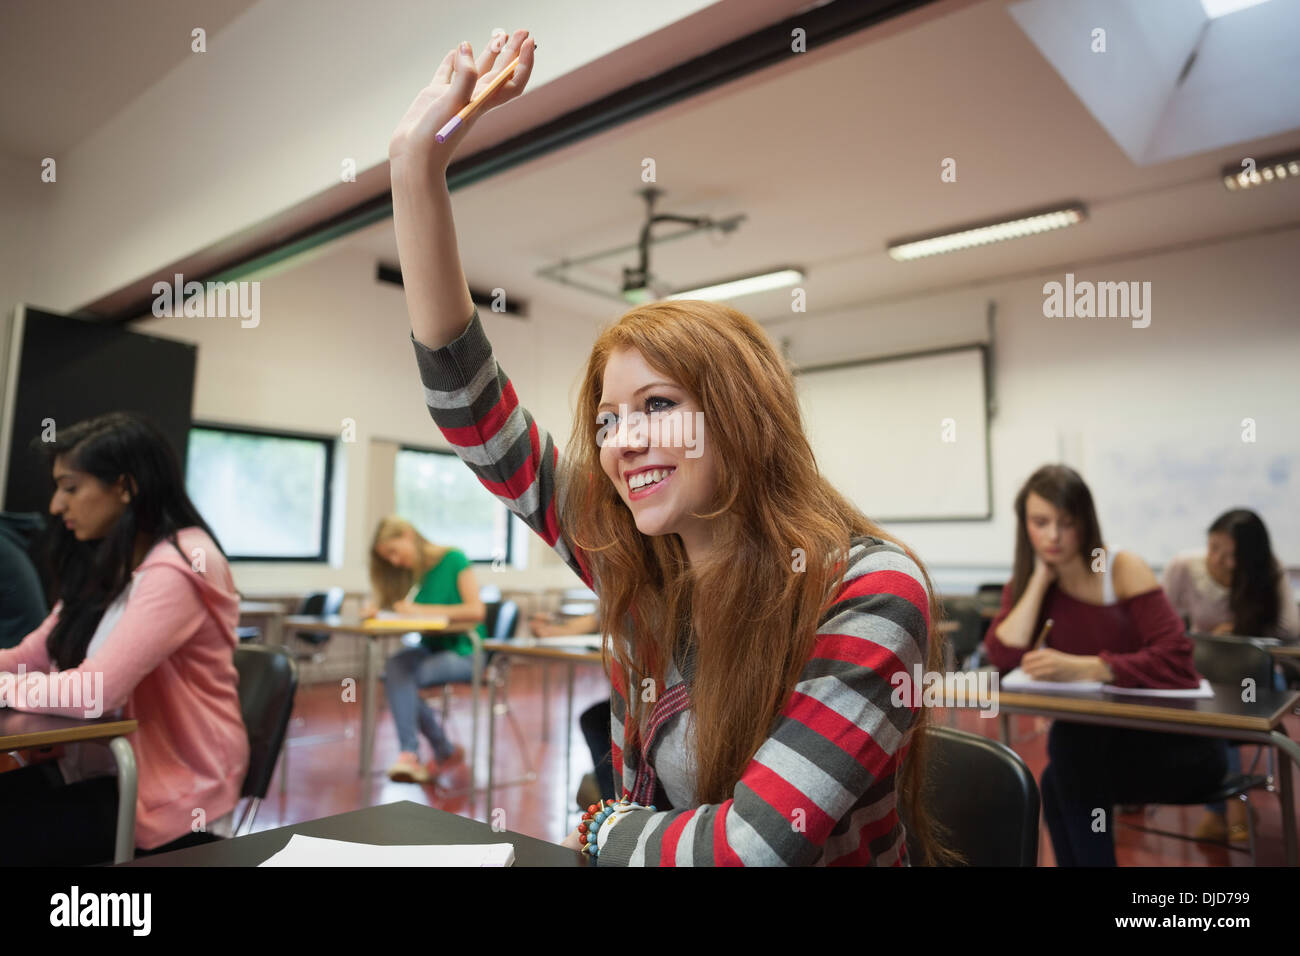 Smiling female student raising her hand in class Stock Photo